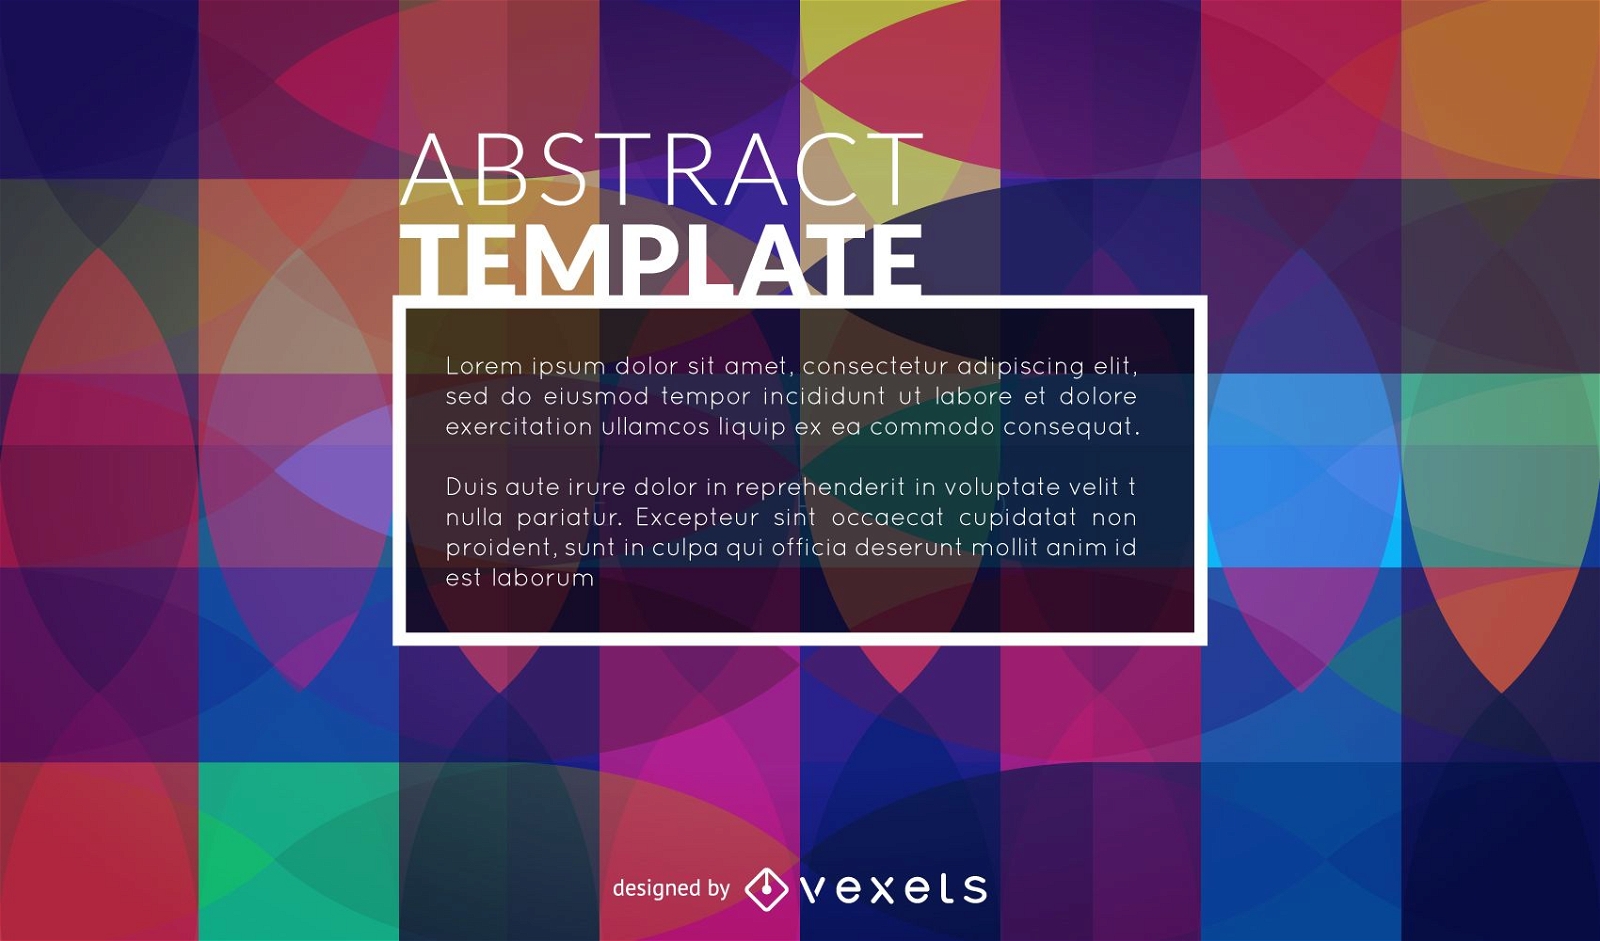 Abstract poster template in a retro style